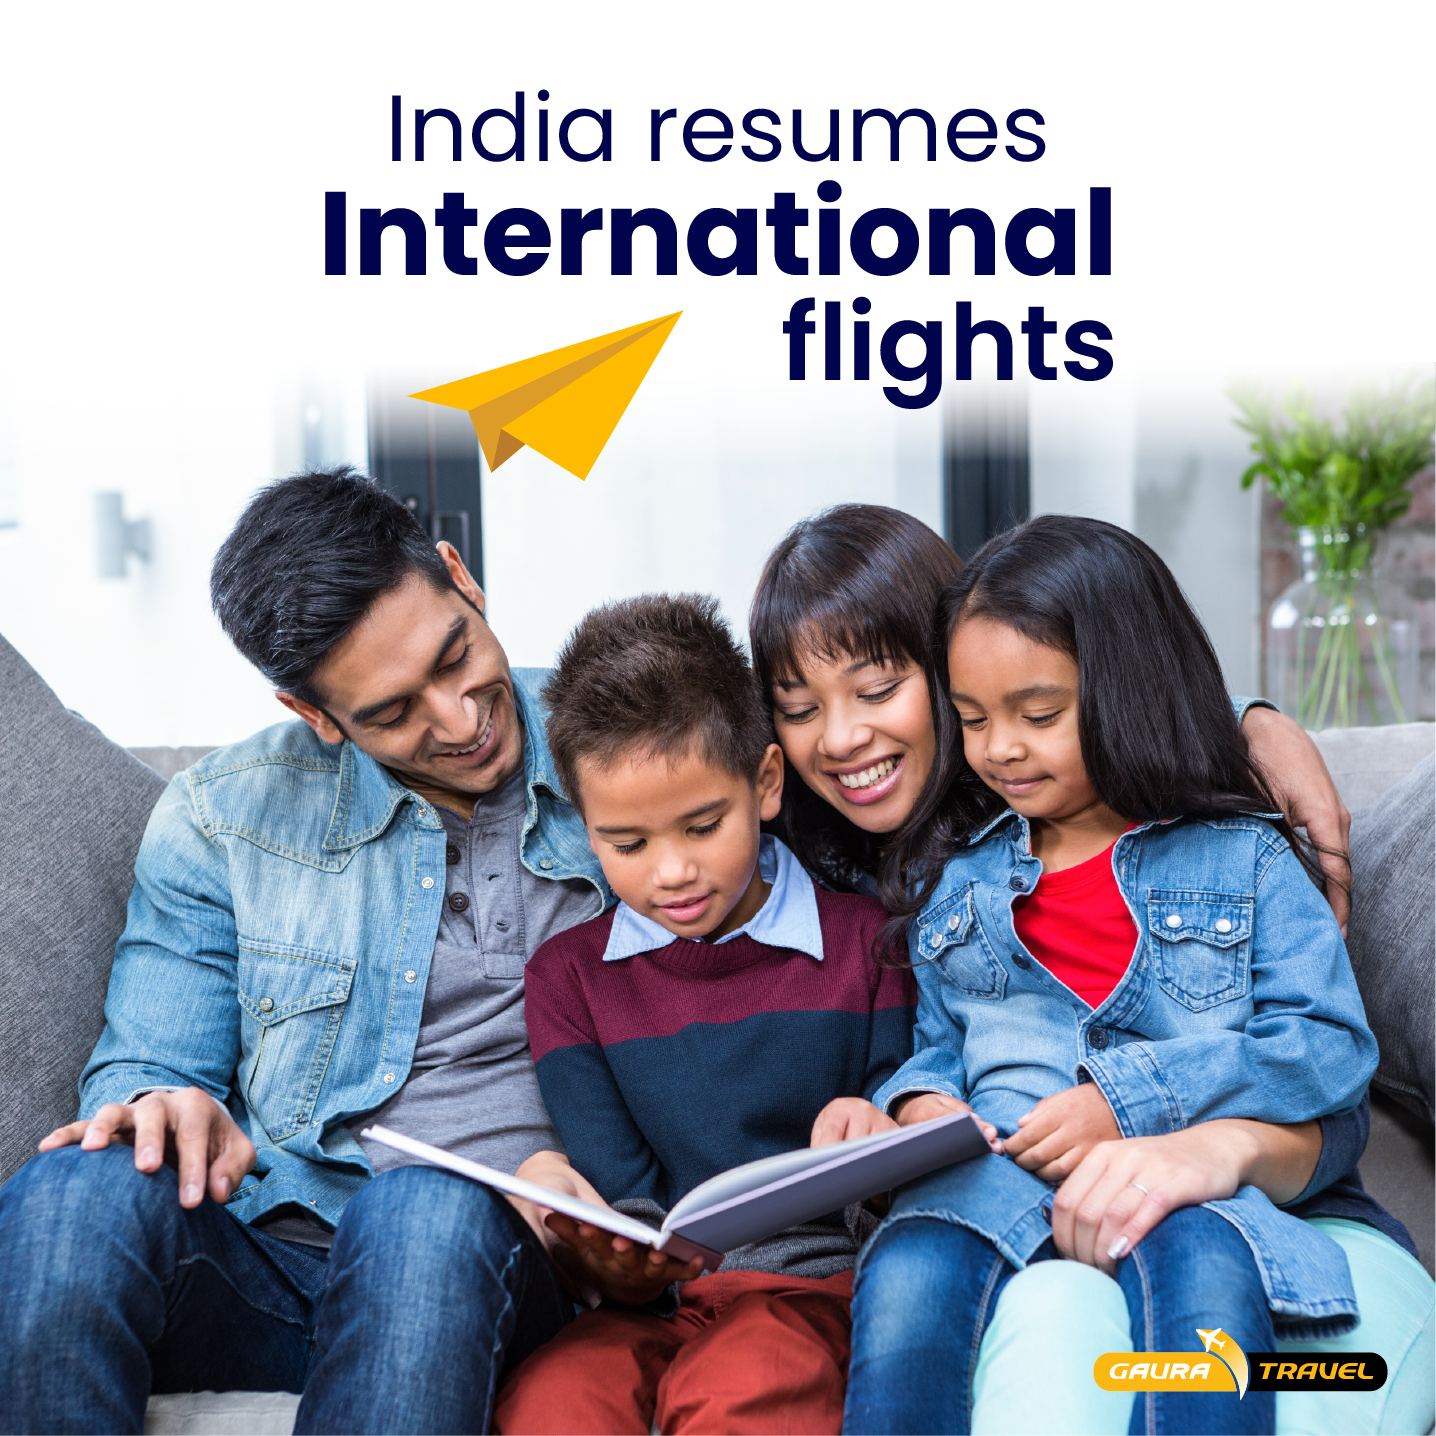 After a 2 year wait, India resumes international flights.